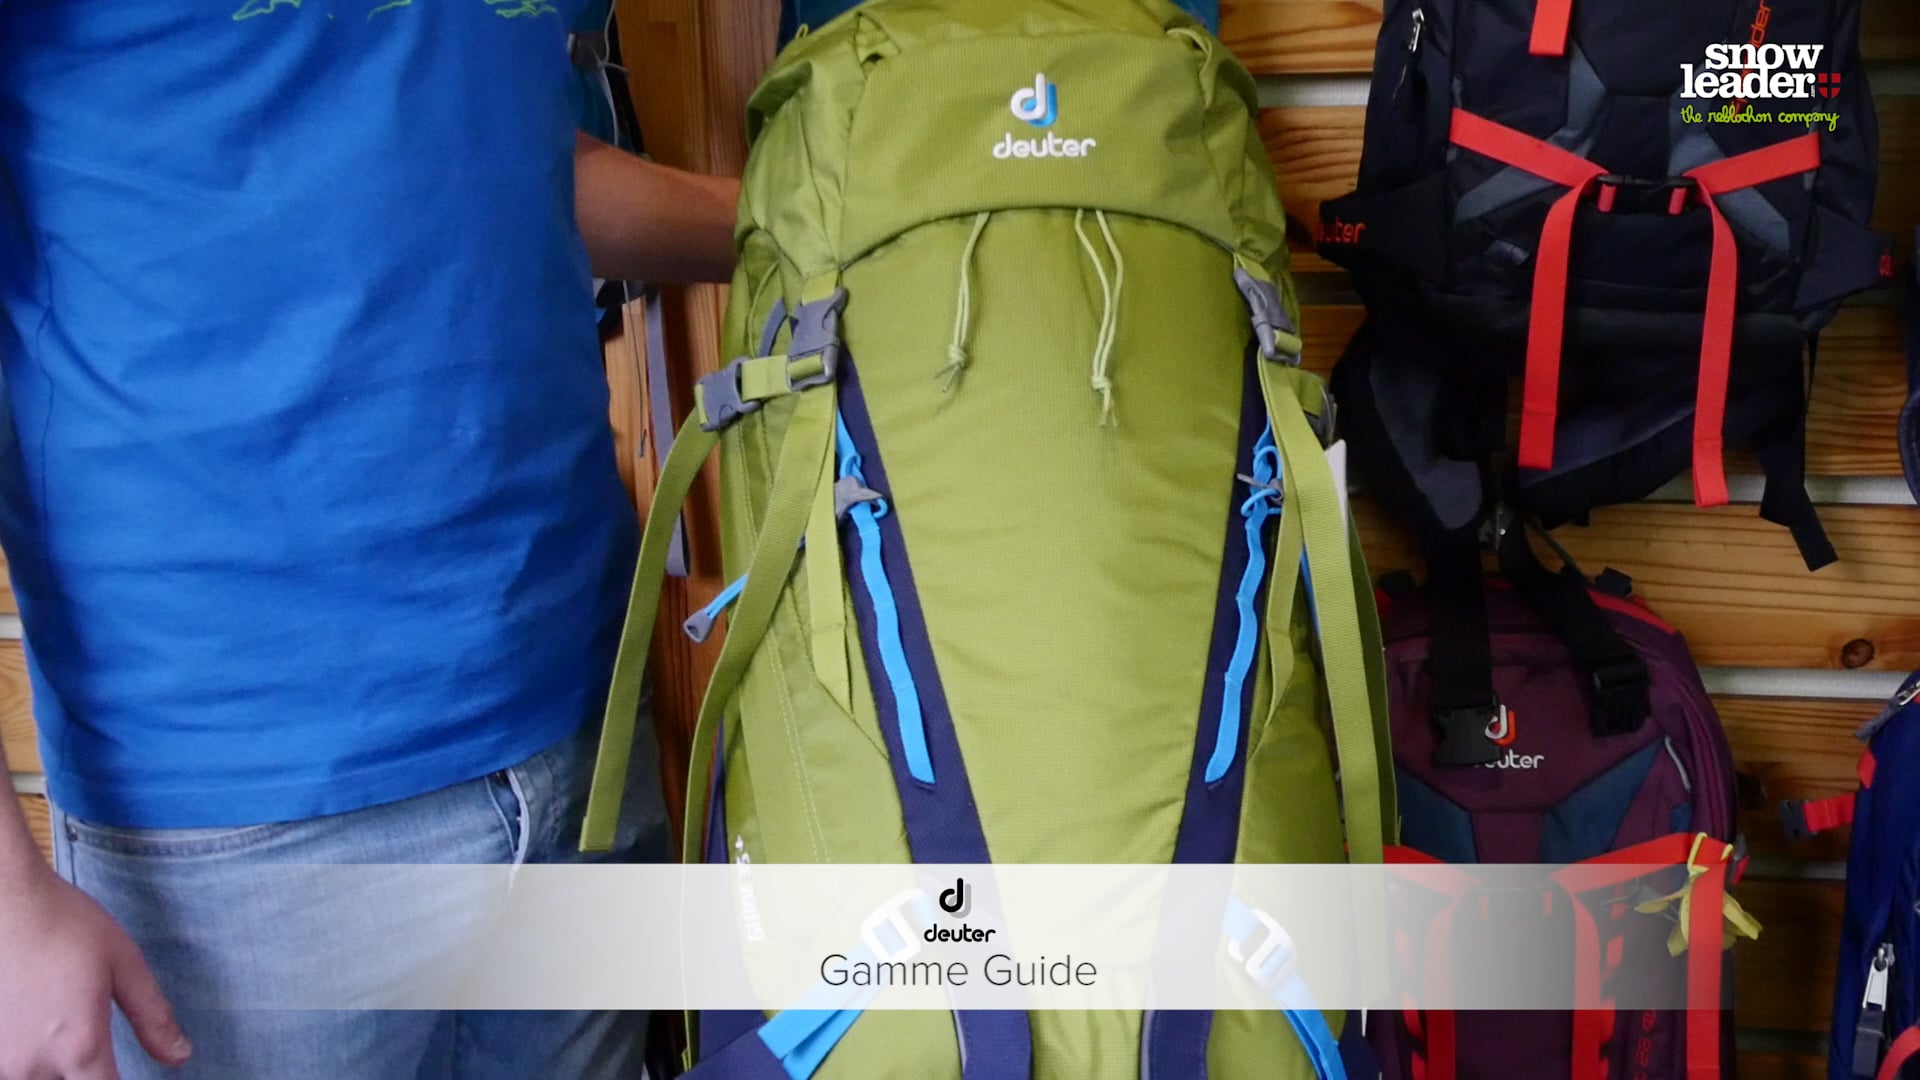 Deuter USA on X: @gunturrj1 Hi there! Here is how to locate our